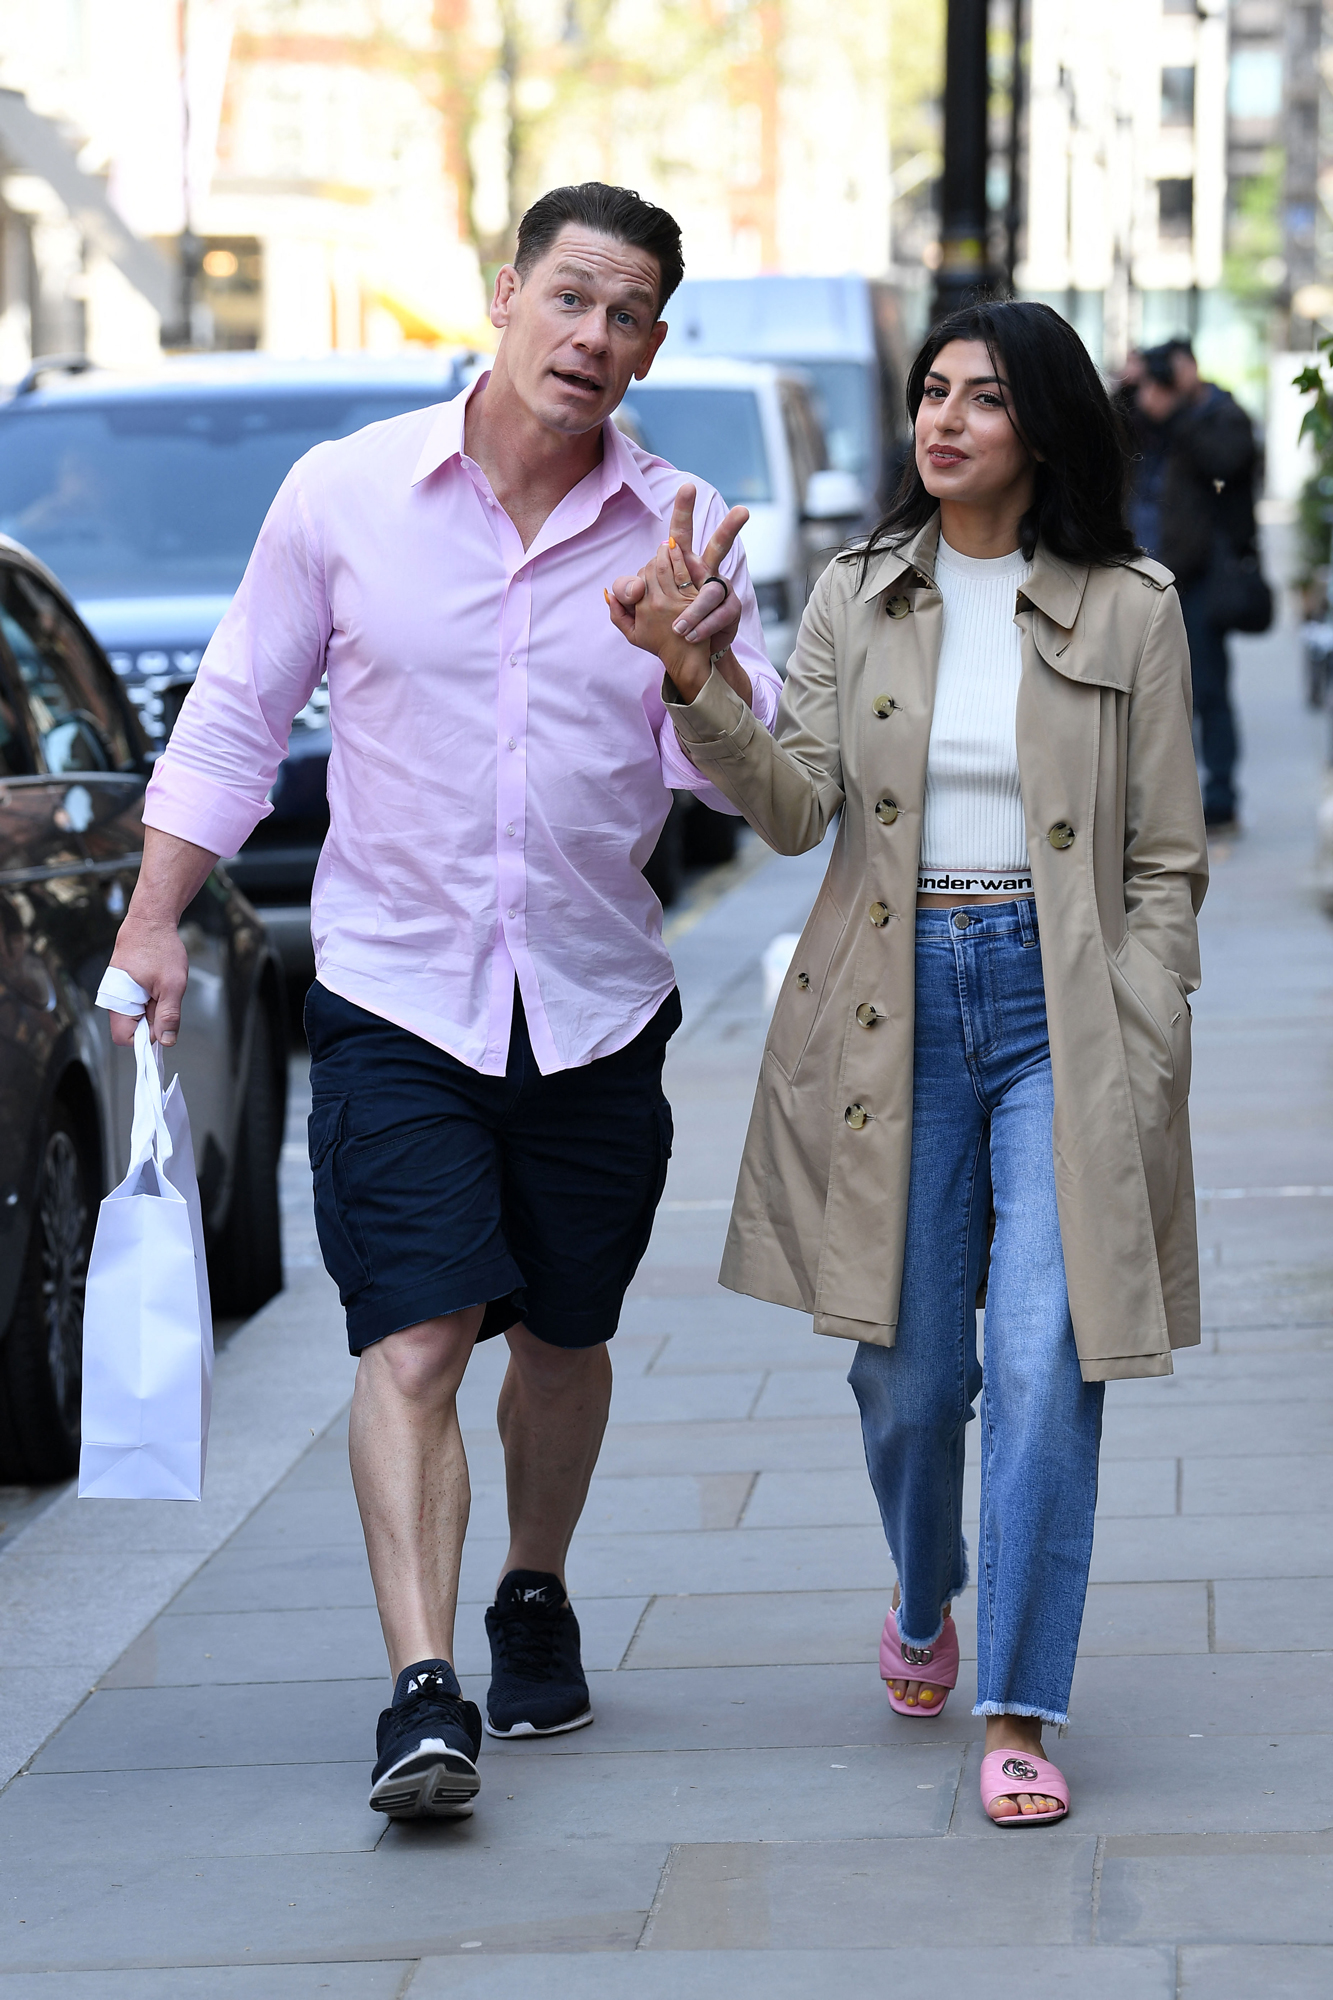 John Cena, Wife Shay Shariatzadeh Spotted on Rare Outing Photo pic